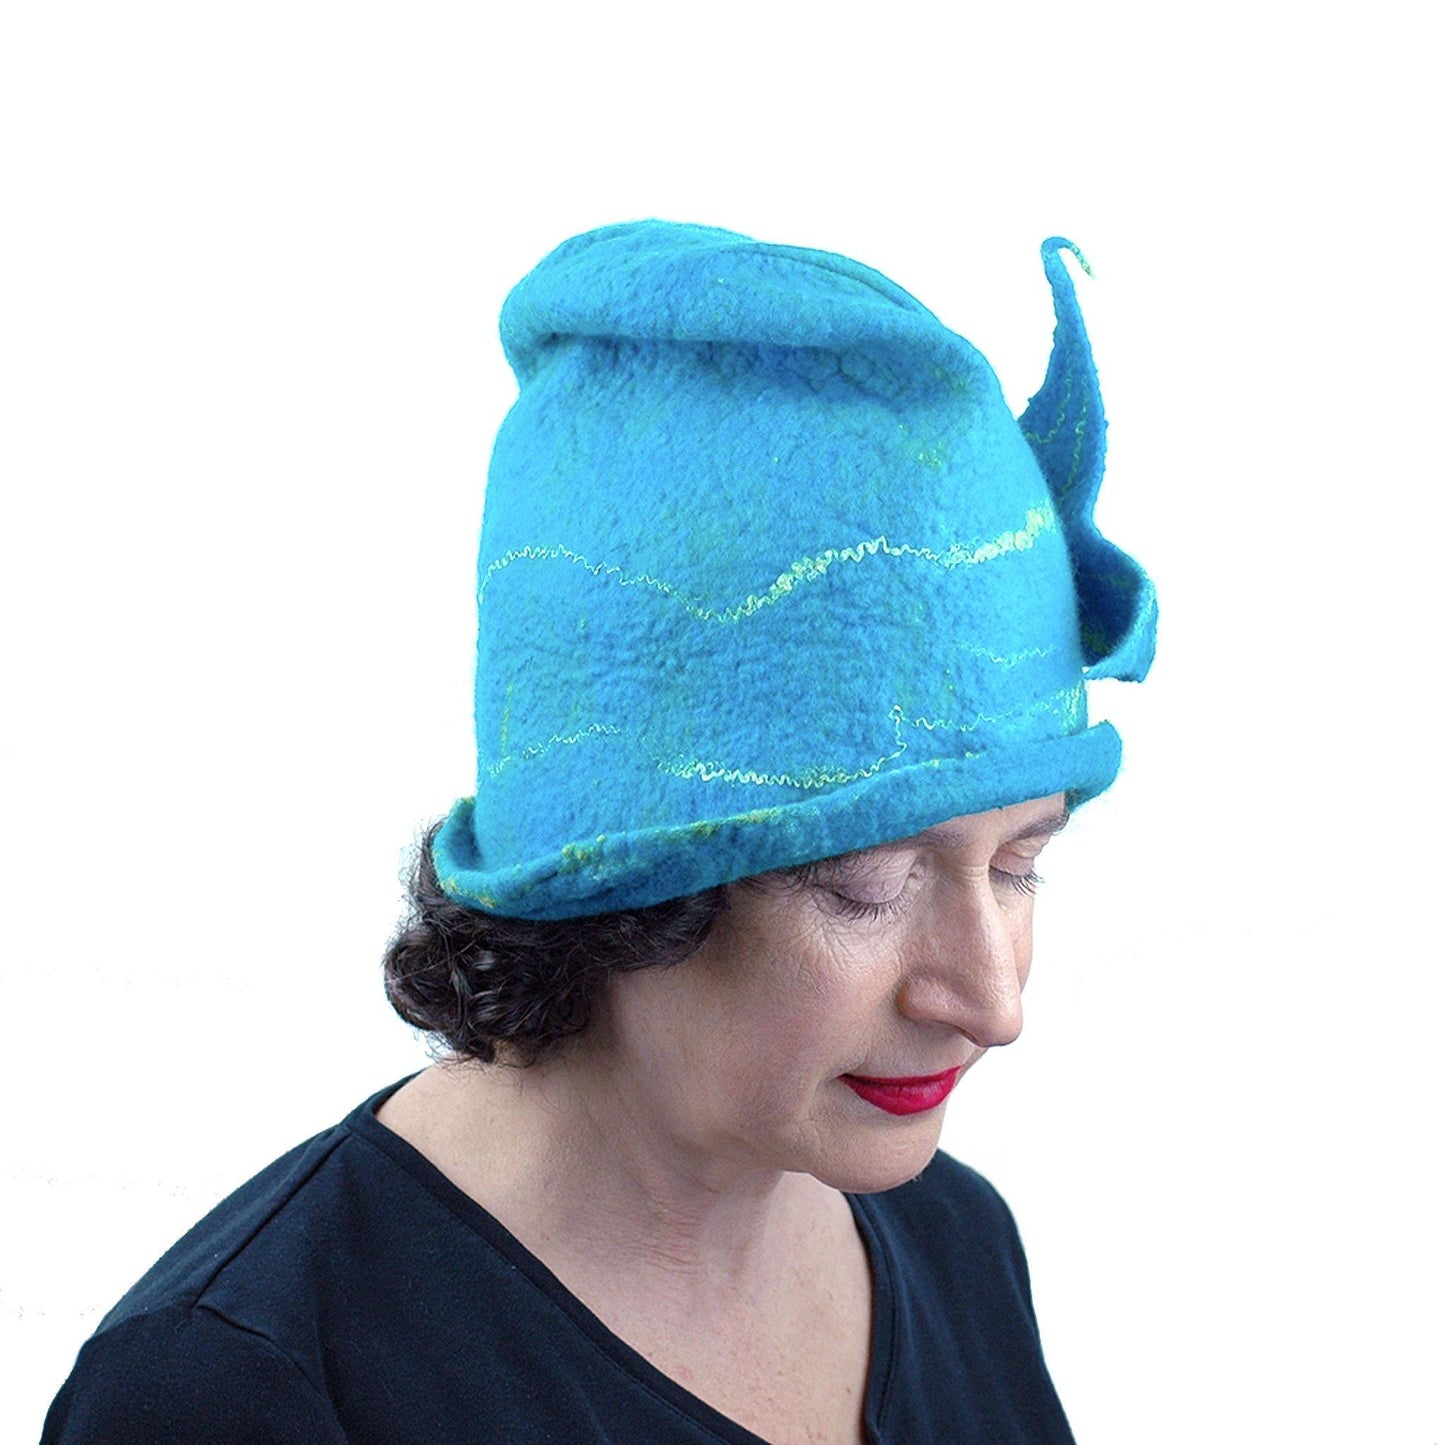 Turquoise Blue Felted Cloche with Mermaid Tail - side view looking down